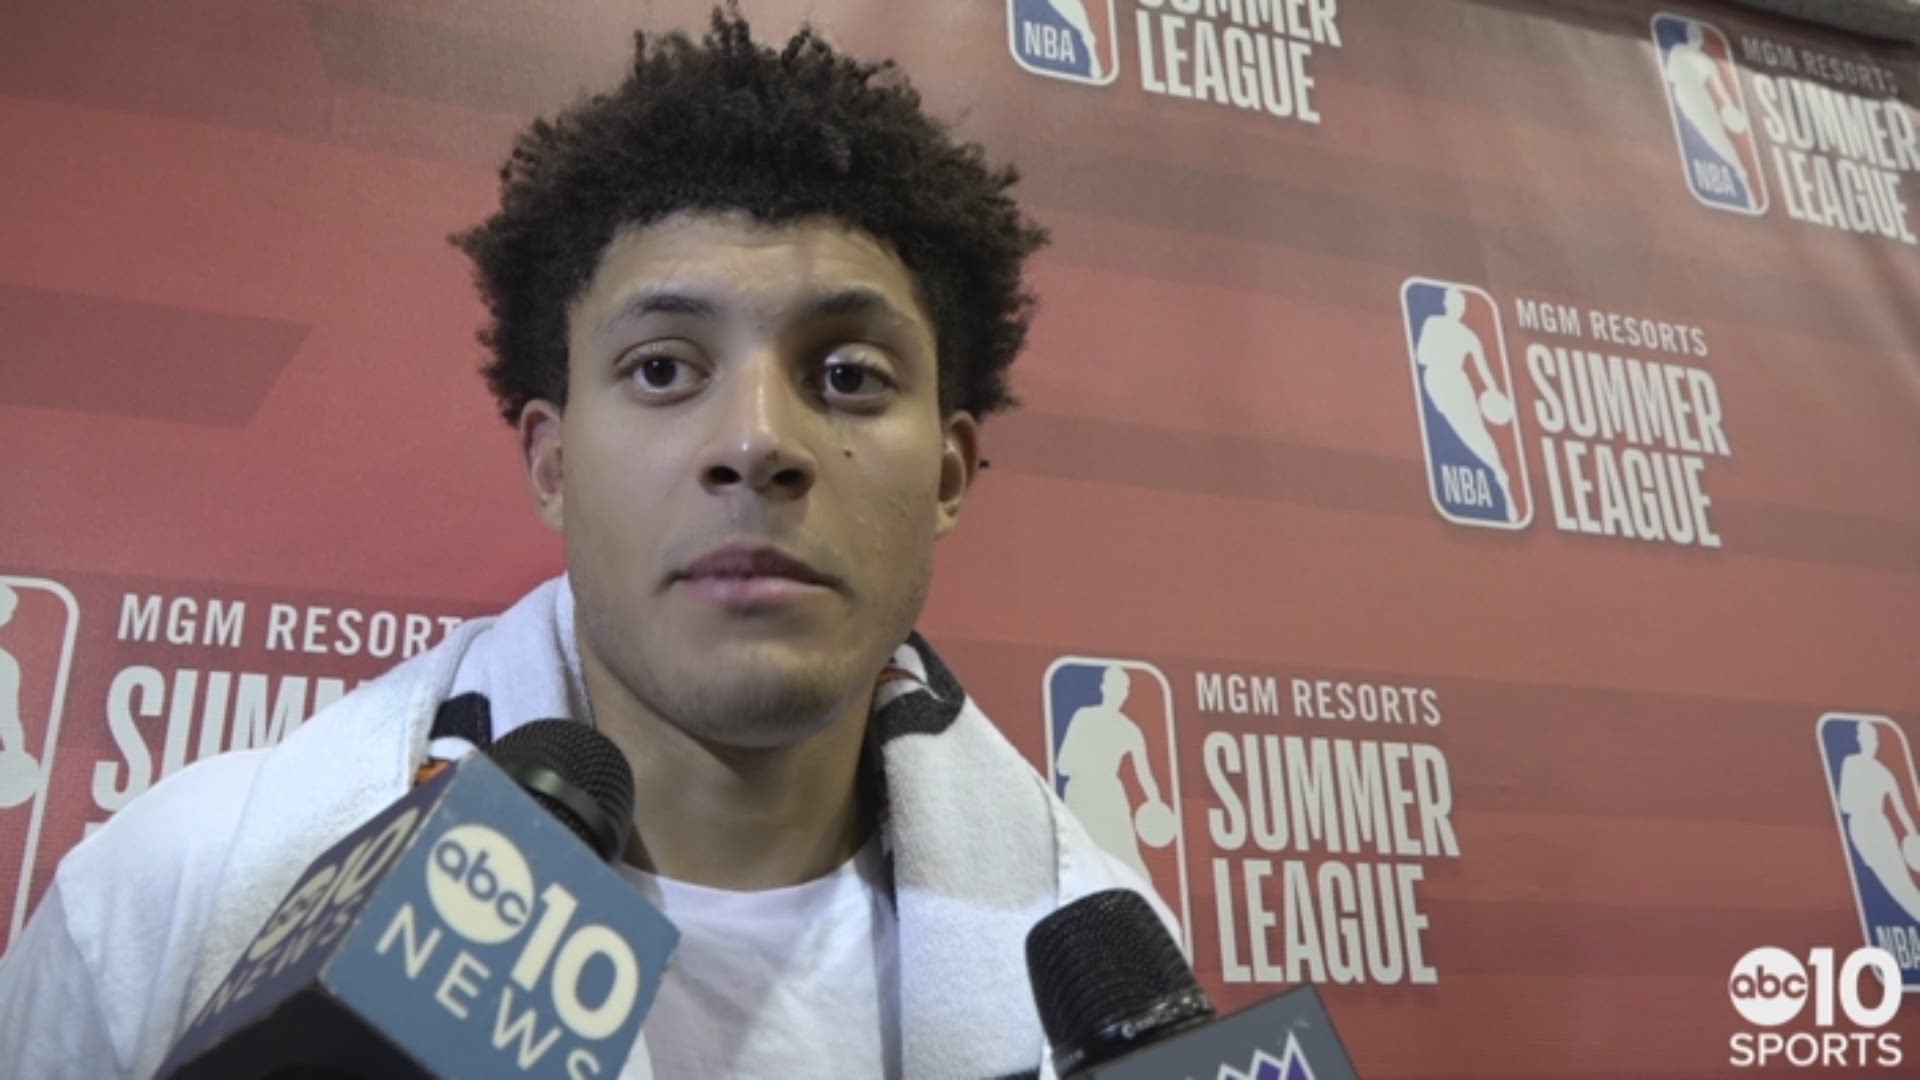 Kings forward Justin Jackson talks about Sunday's loss to the Los Angeles Clippers, what impresses him most about his squad and seeing Sacramento fans in Las Vegas.